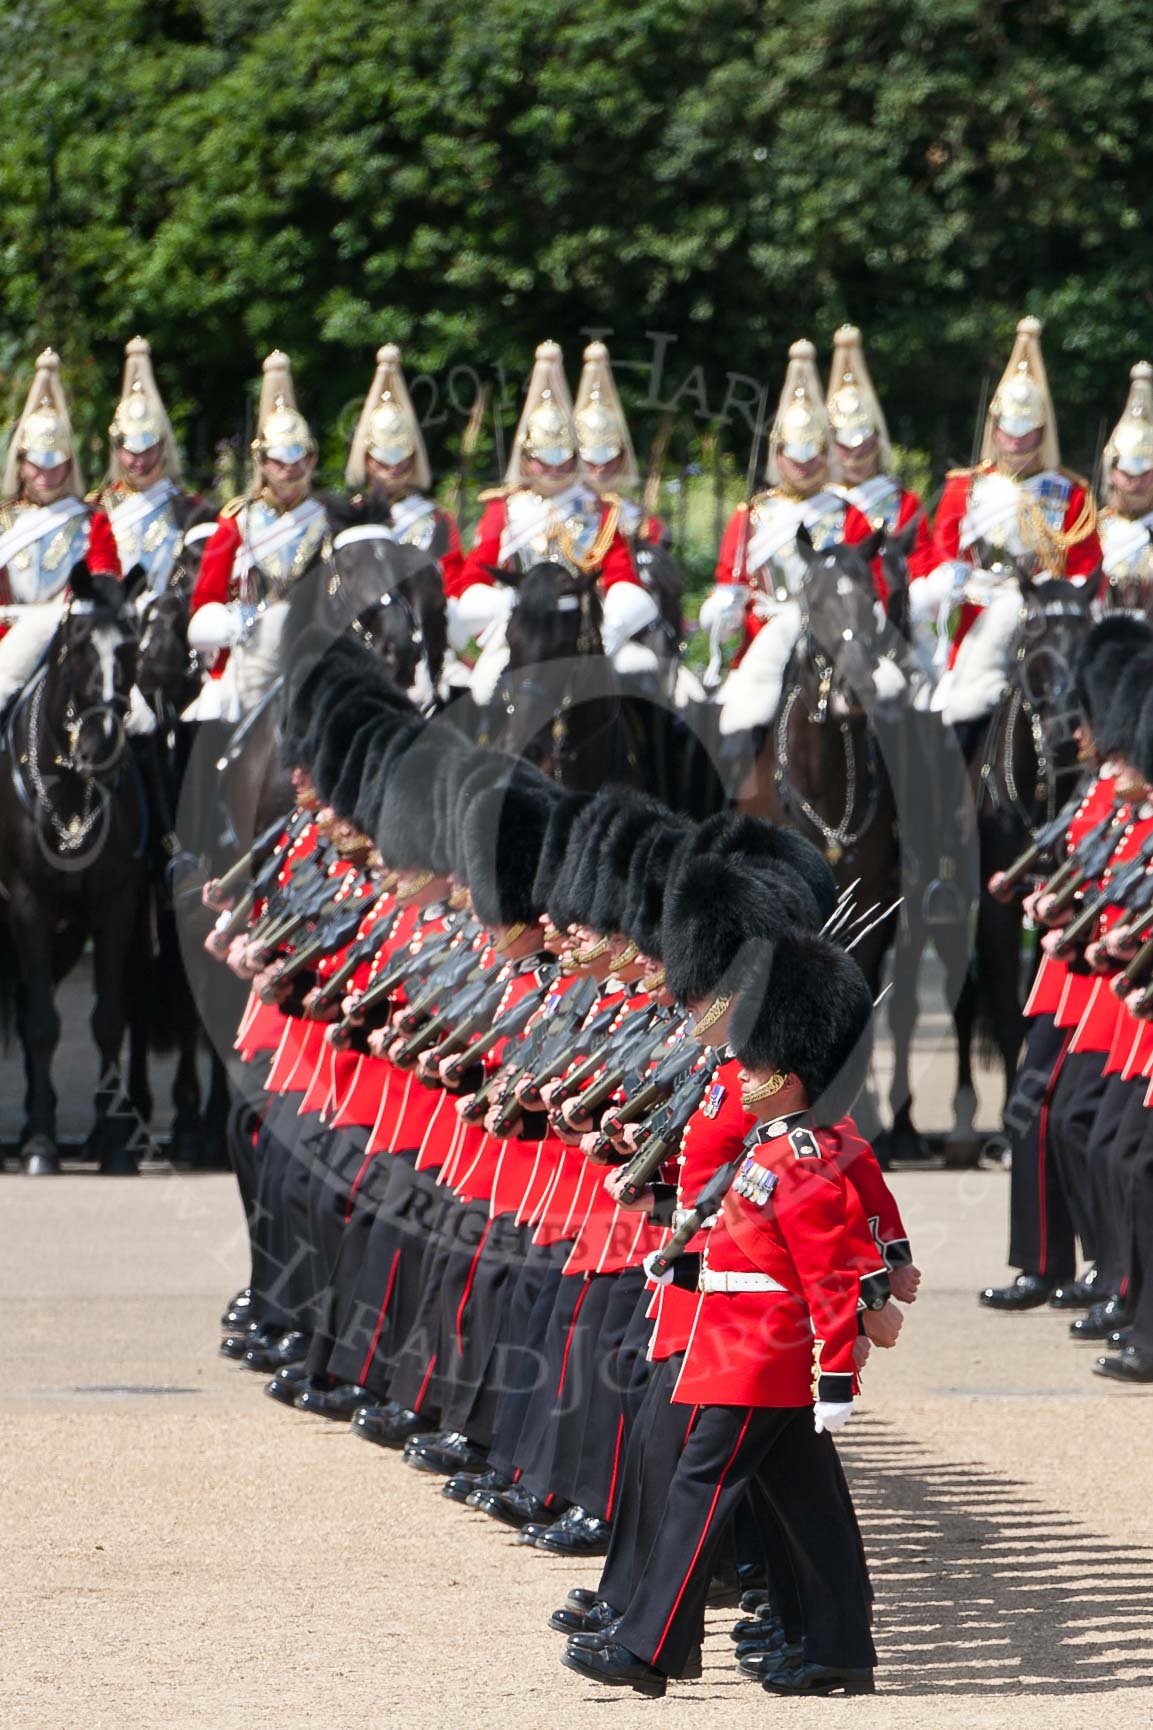 Trooping the Colour 2009: The March Past - No. 6 Guard, F Company Scots Guards, marching in front of The Life Guards..
Horse Guards Parade, Westminster,
London SW1,

United Kingdom,
on 13 June 2009 at 11:44, image #216